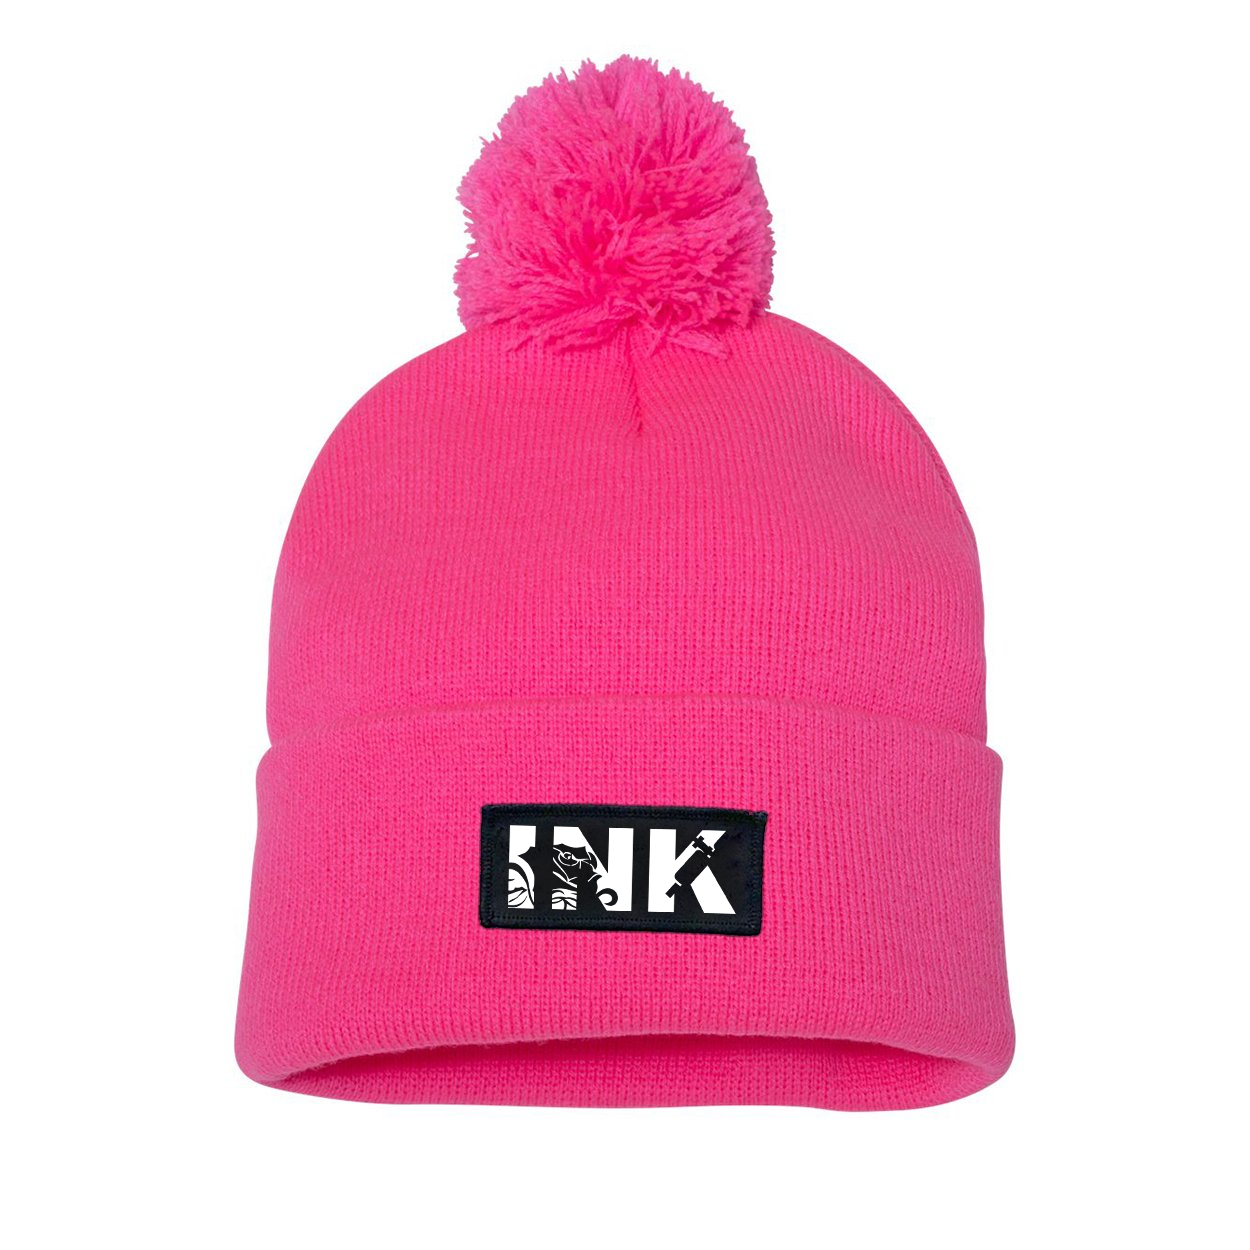 Ink Tattoo Logo Night Out Woven Patch Roll Up Pom Knit Beanie Pink (White Logo)